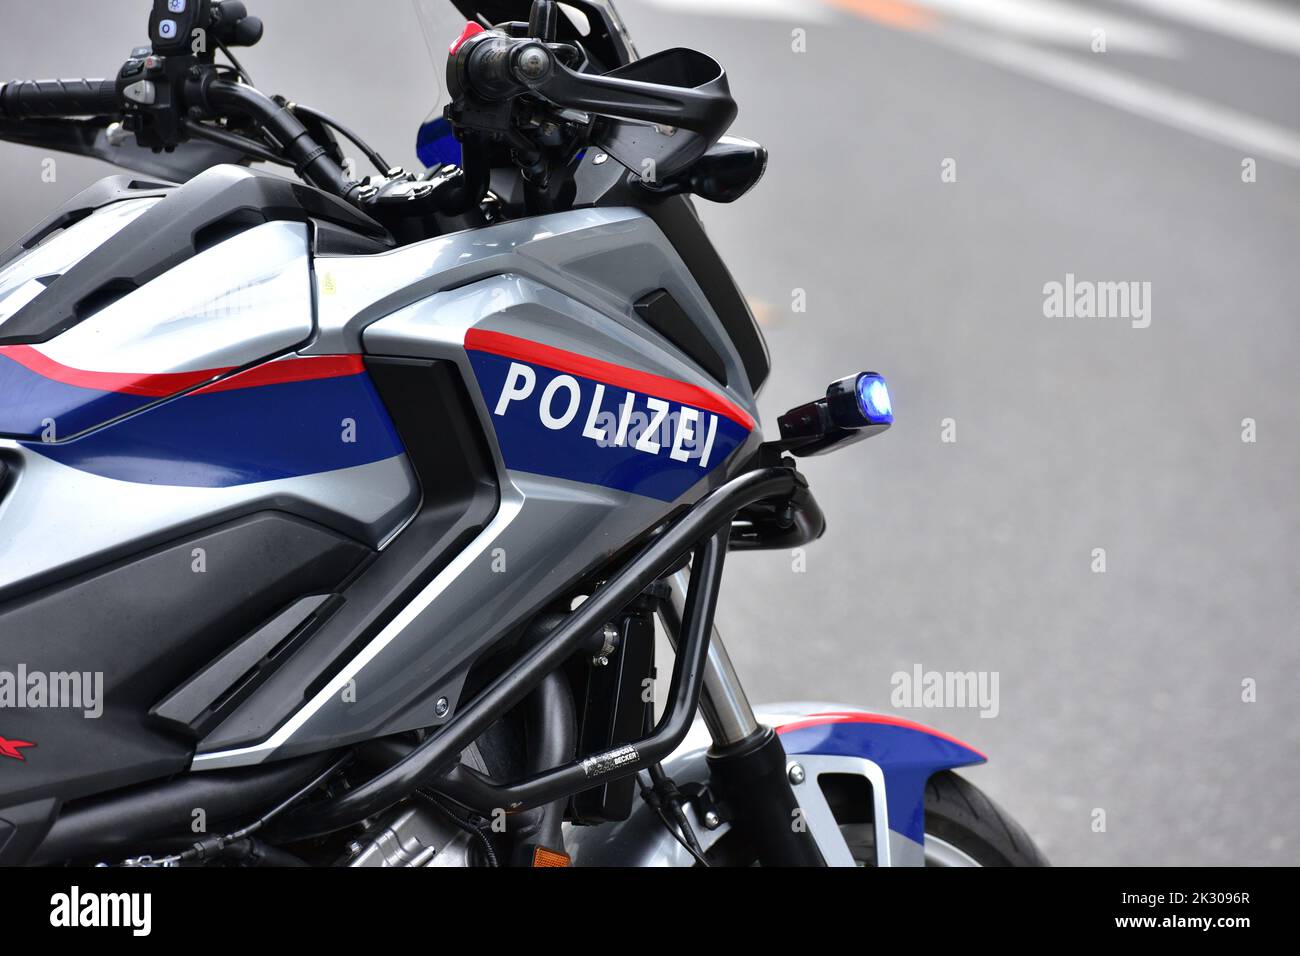 Police motorcycle in action in Linz, Austria Stock Photo